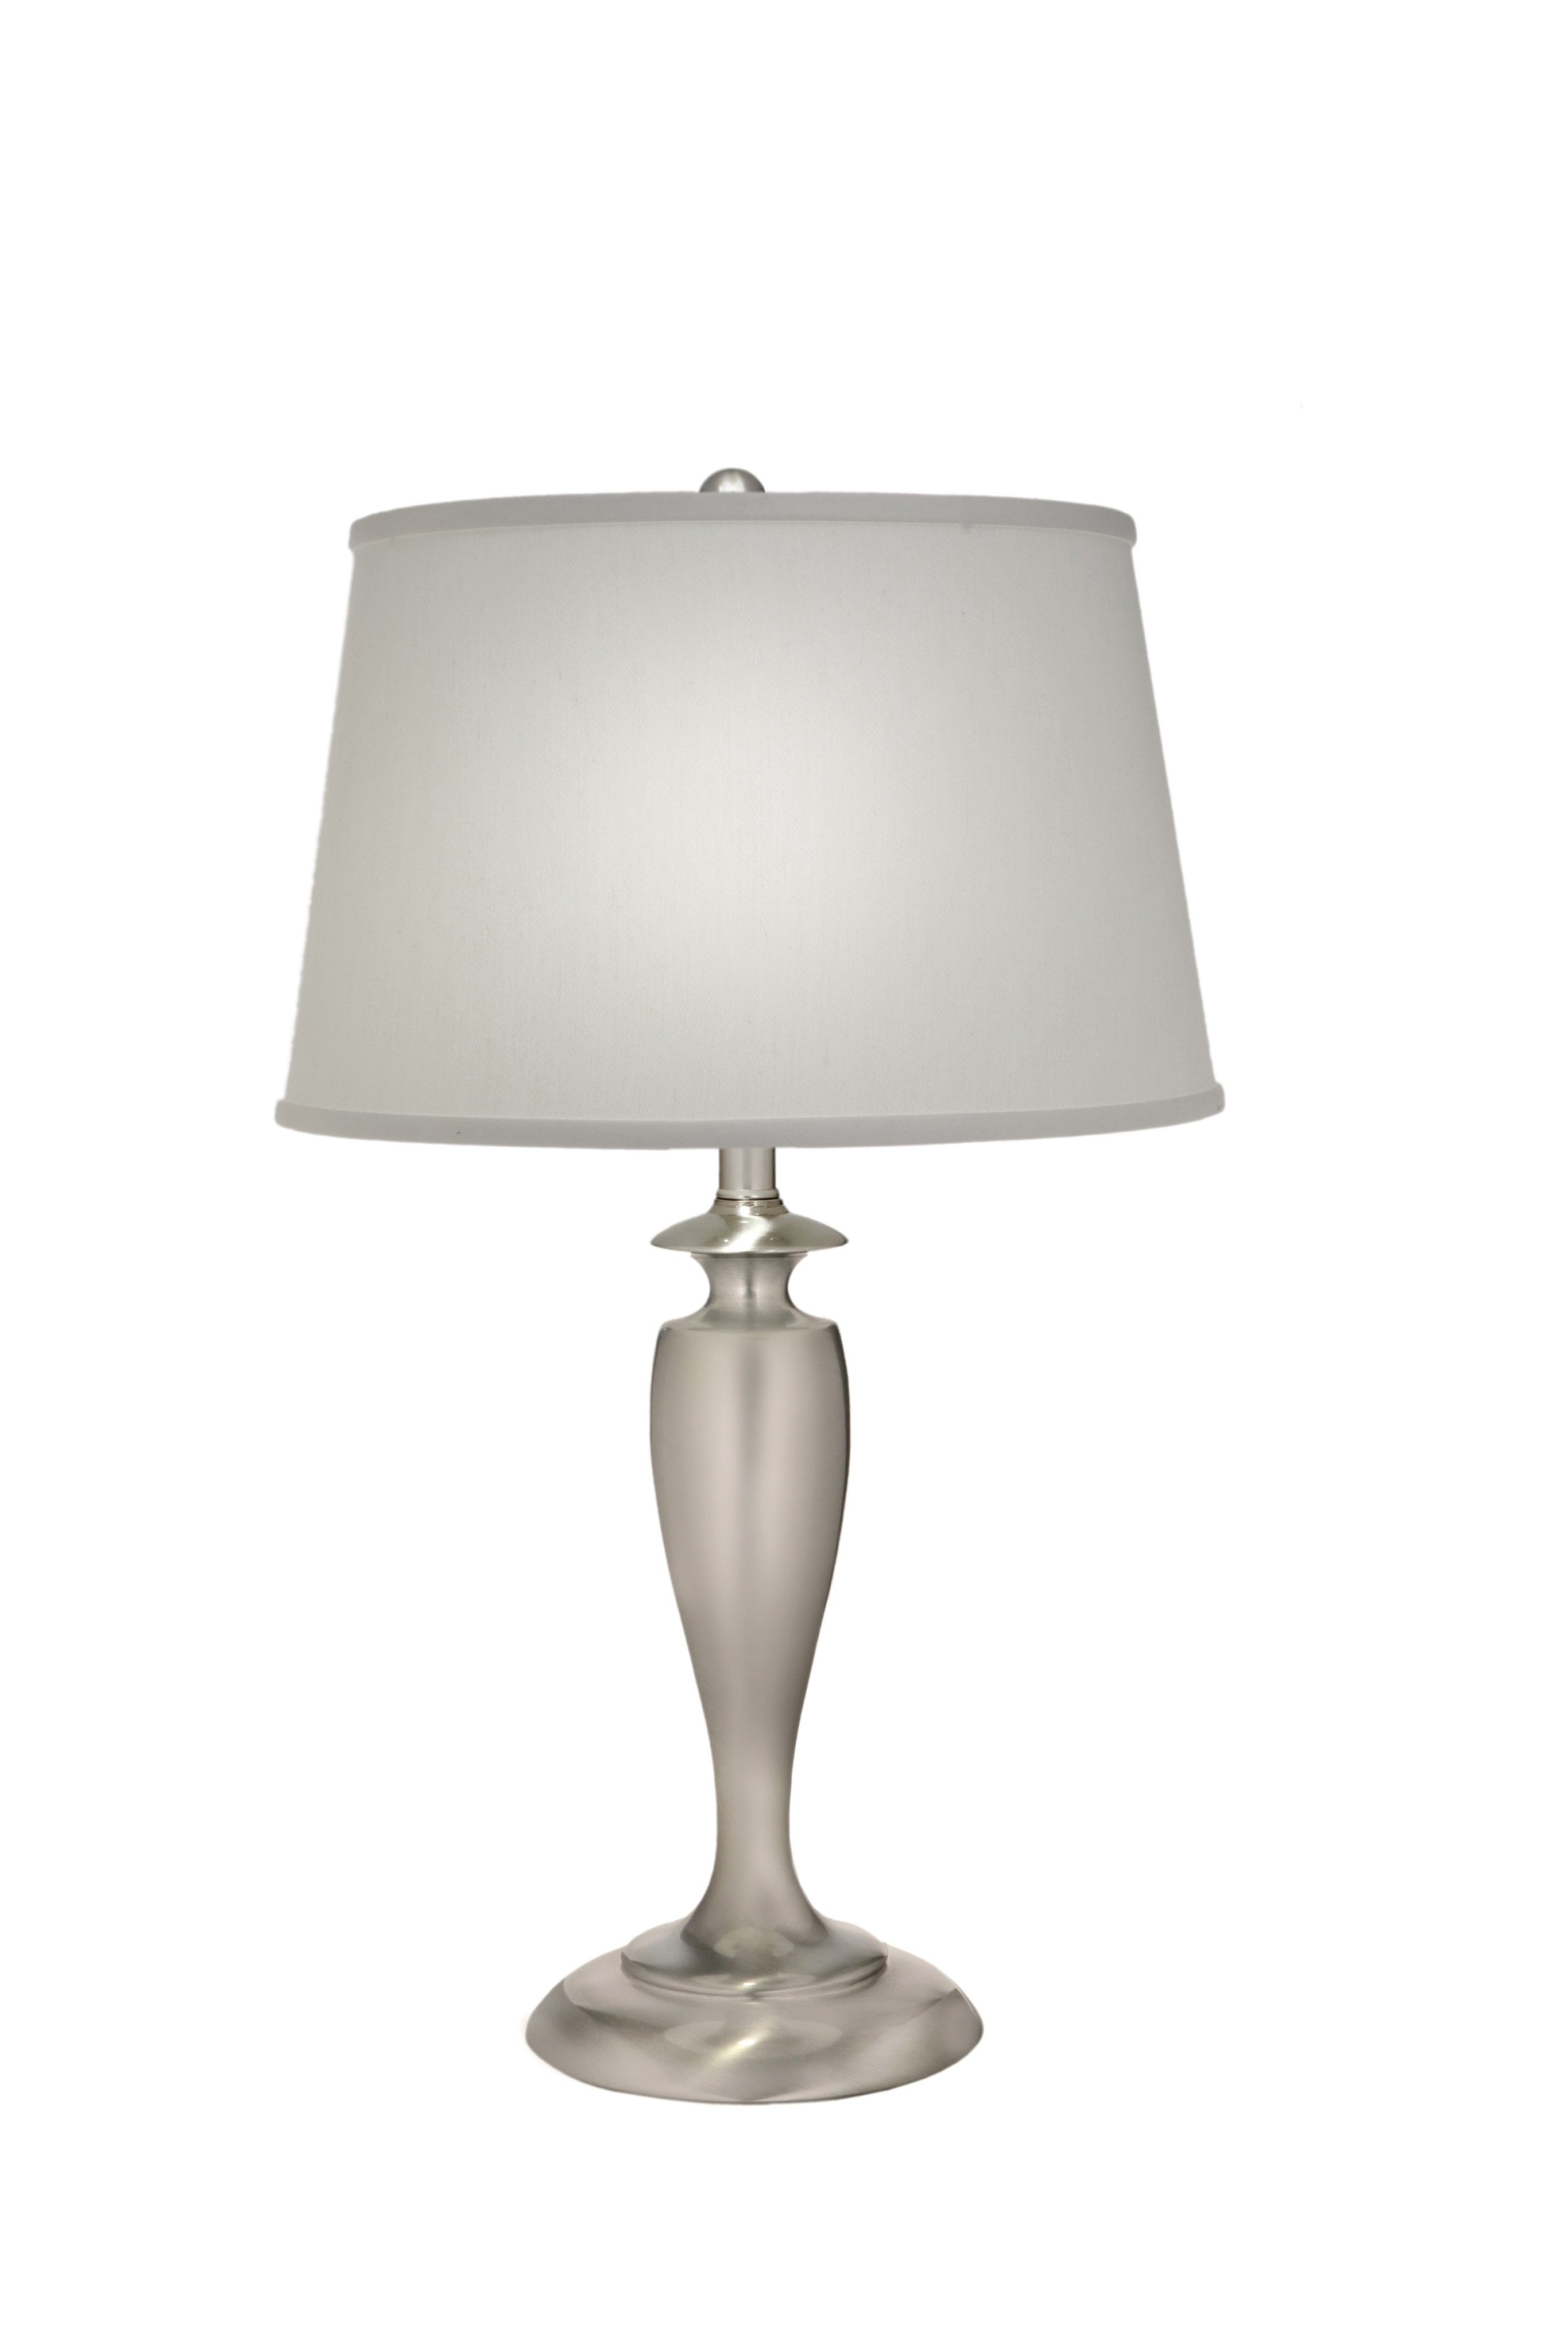 Stiffel-TL-A960-SN-One Light Table Lamp   Satin Nickel Finish with Pearl Supreme Satin Shade